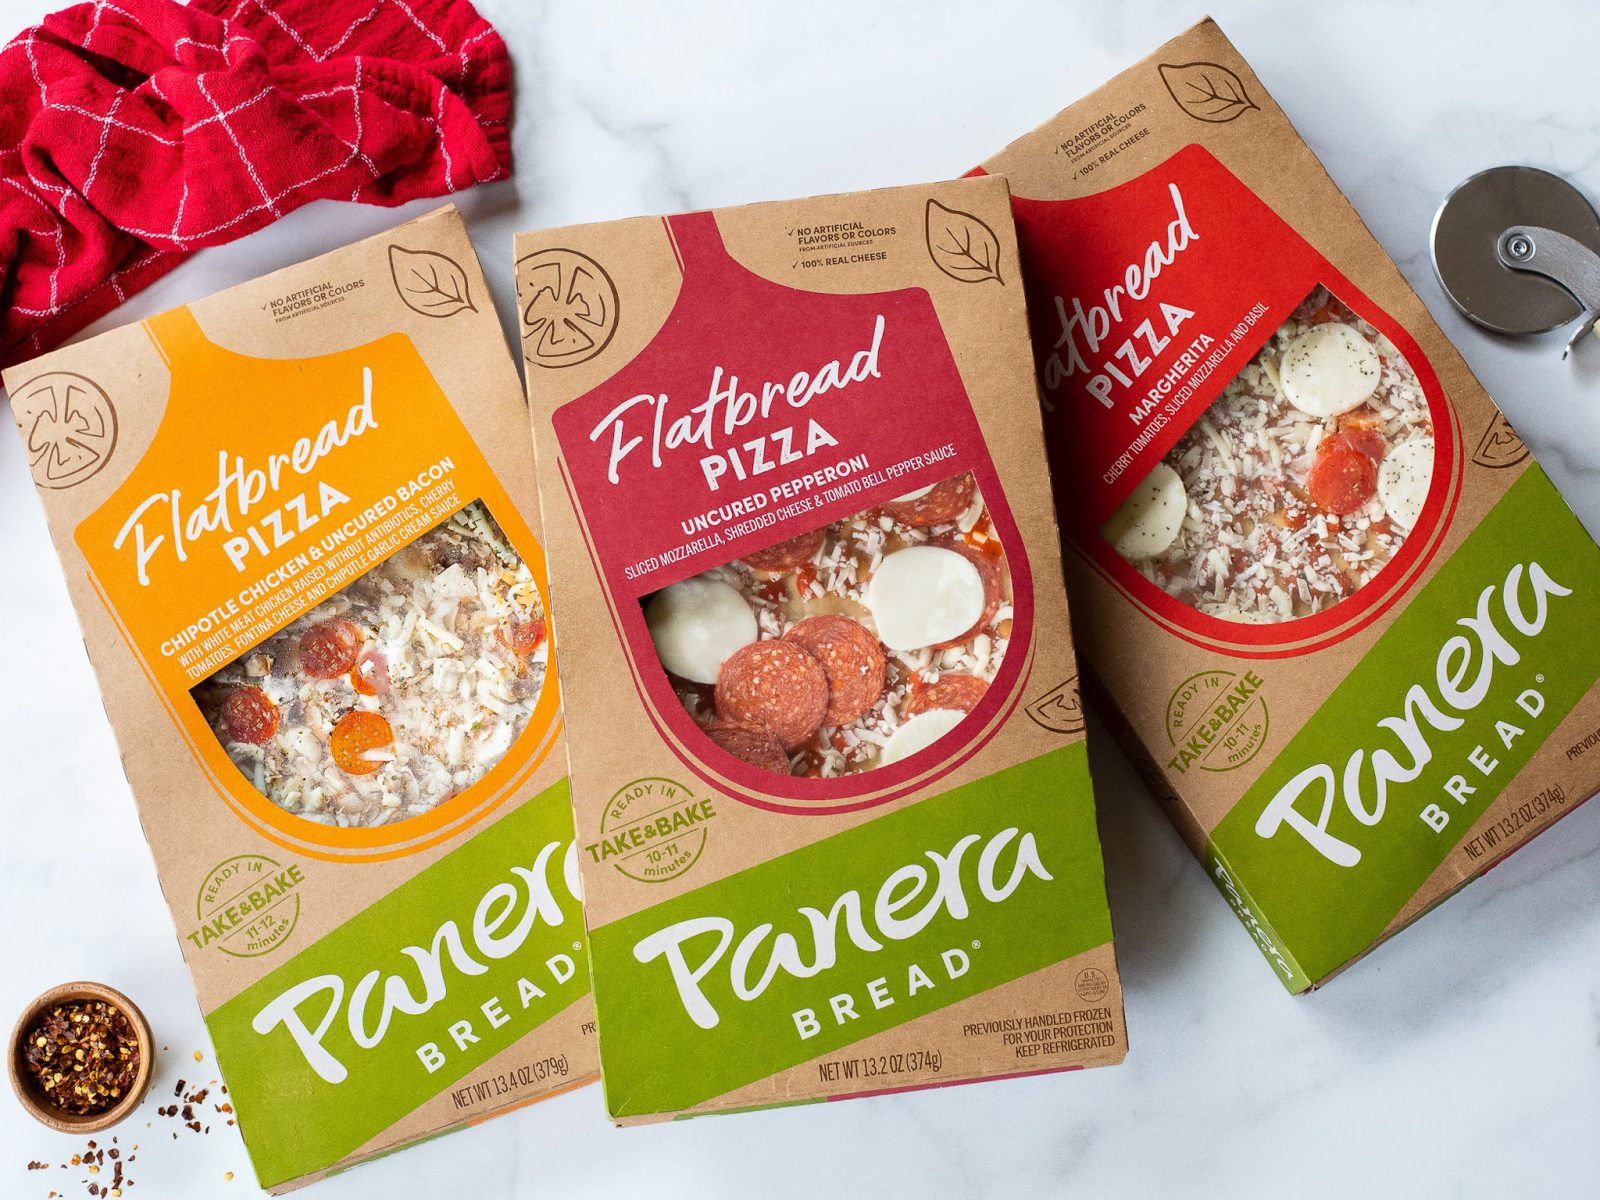 Grab NEW Panera Flatbread Pizzas For Easy Meals & Game Day Snacking!